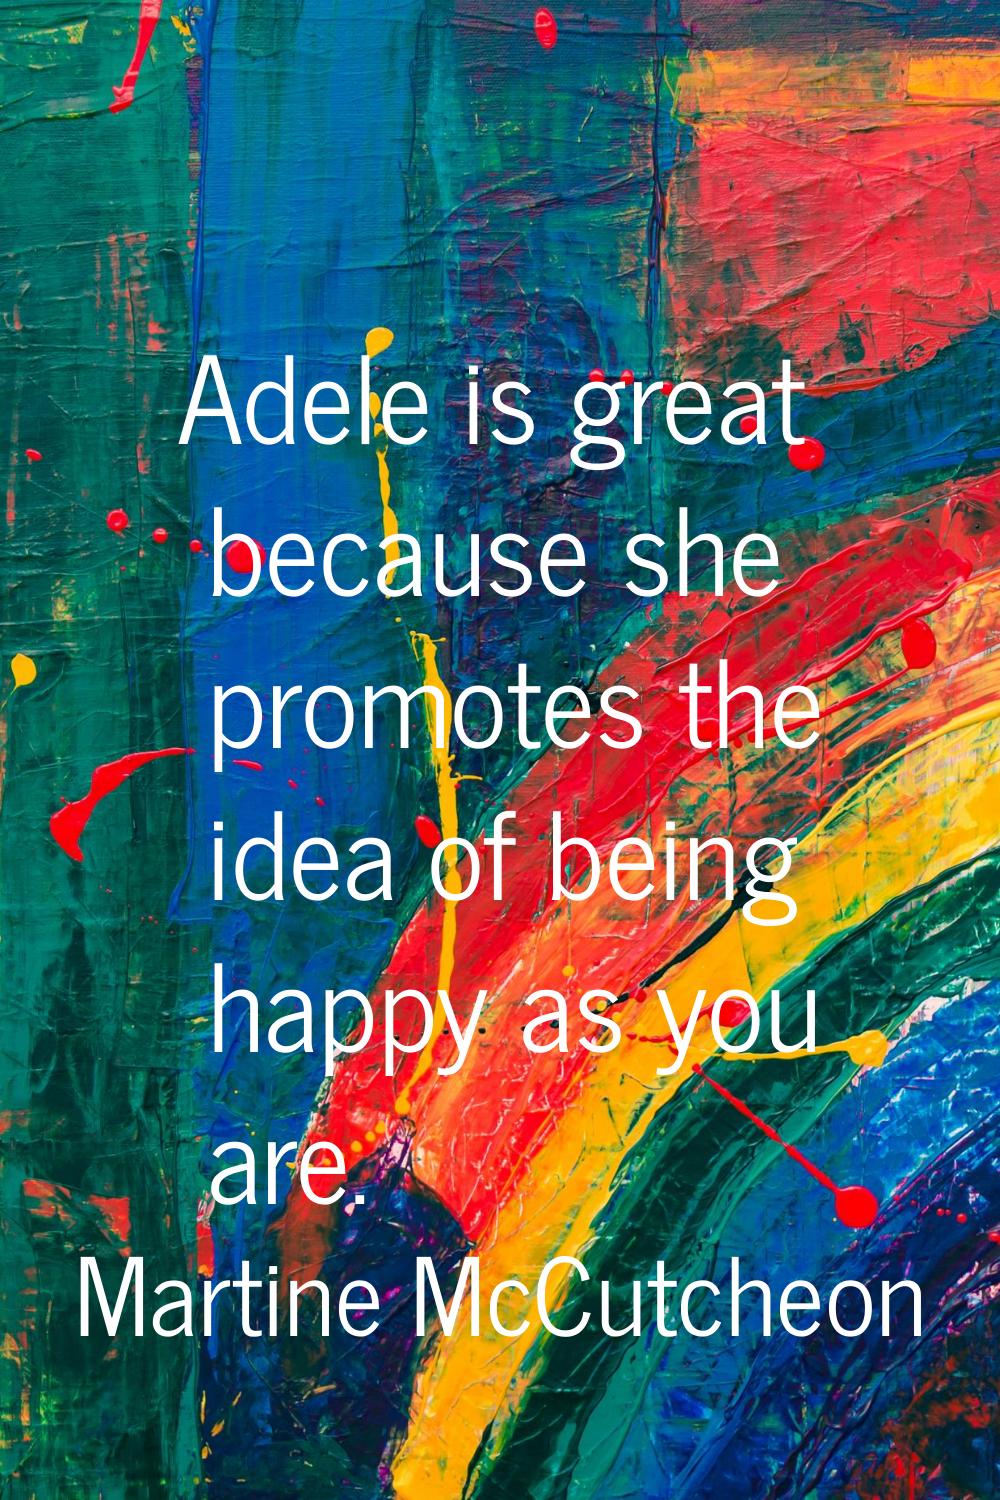 Adele is great because she promotes the idea of being happy as you are.